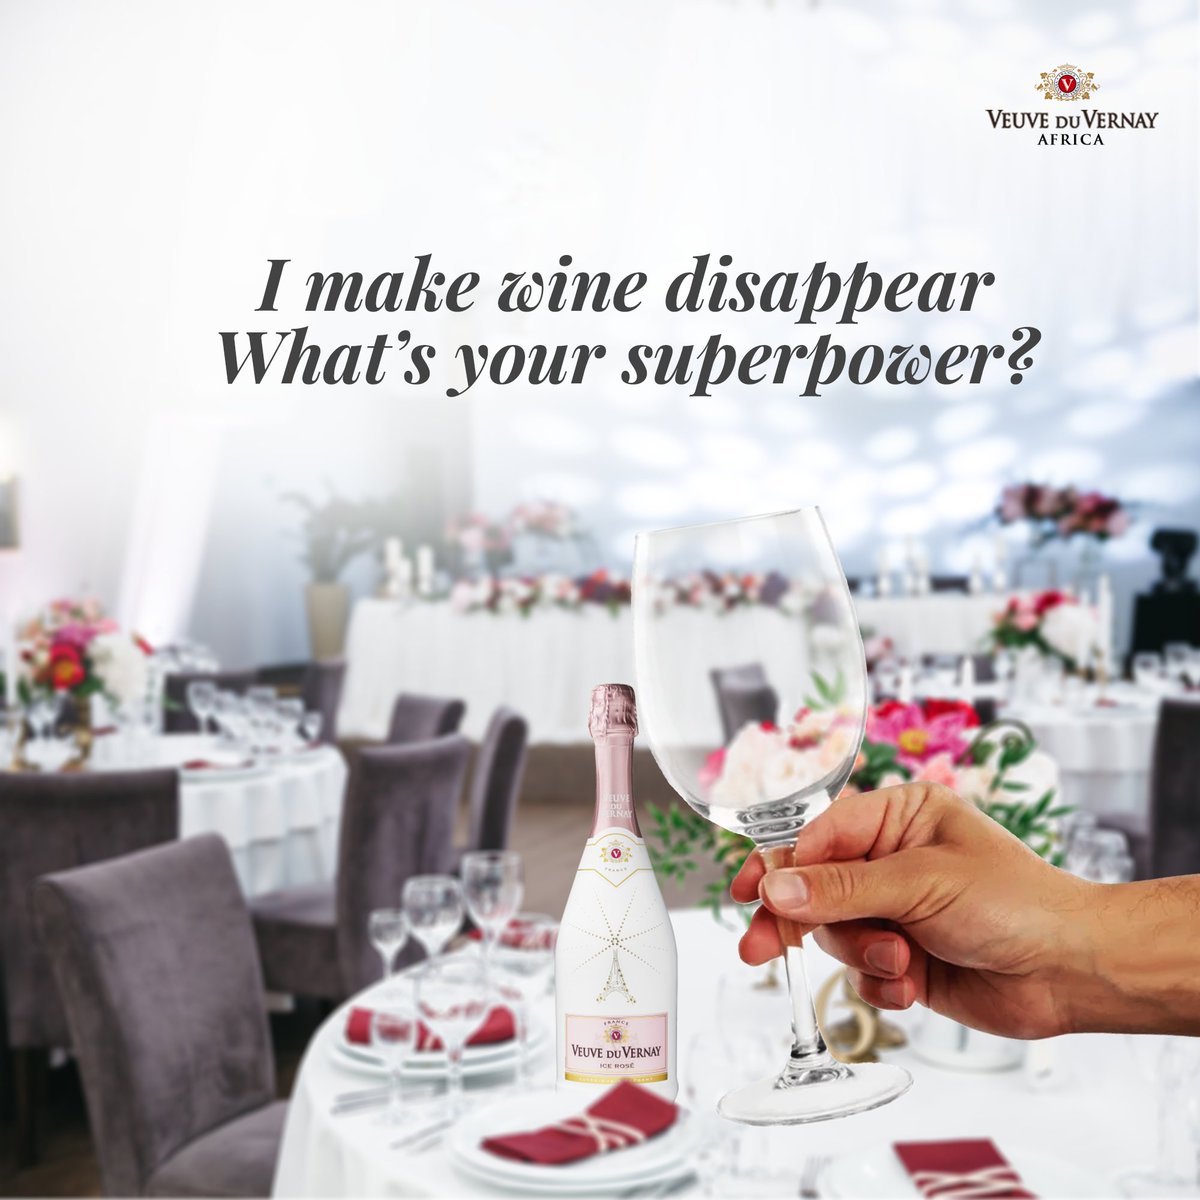 My superpower is making delicious wine disappear, one sip at a time. What's yours?

#WineLovers #Luxury #FrenchWine #Wine #WineOClock #FoodAndWine #SparklingWine #VeuveDuVernay #ATasteOfFrance